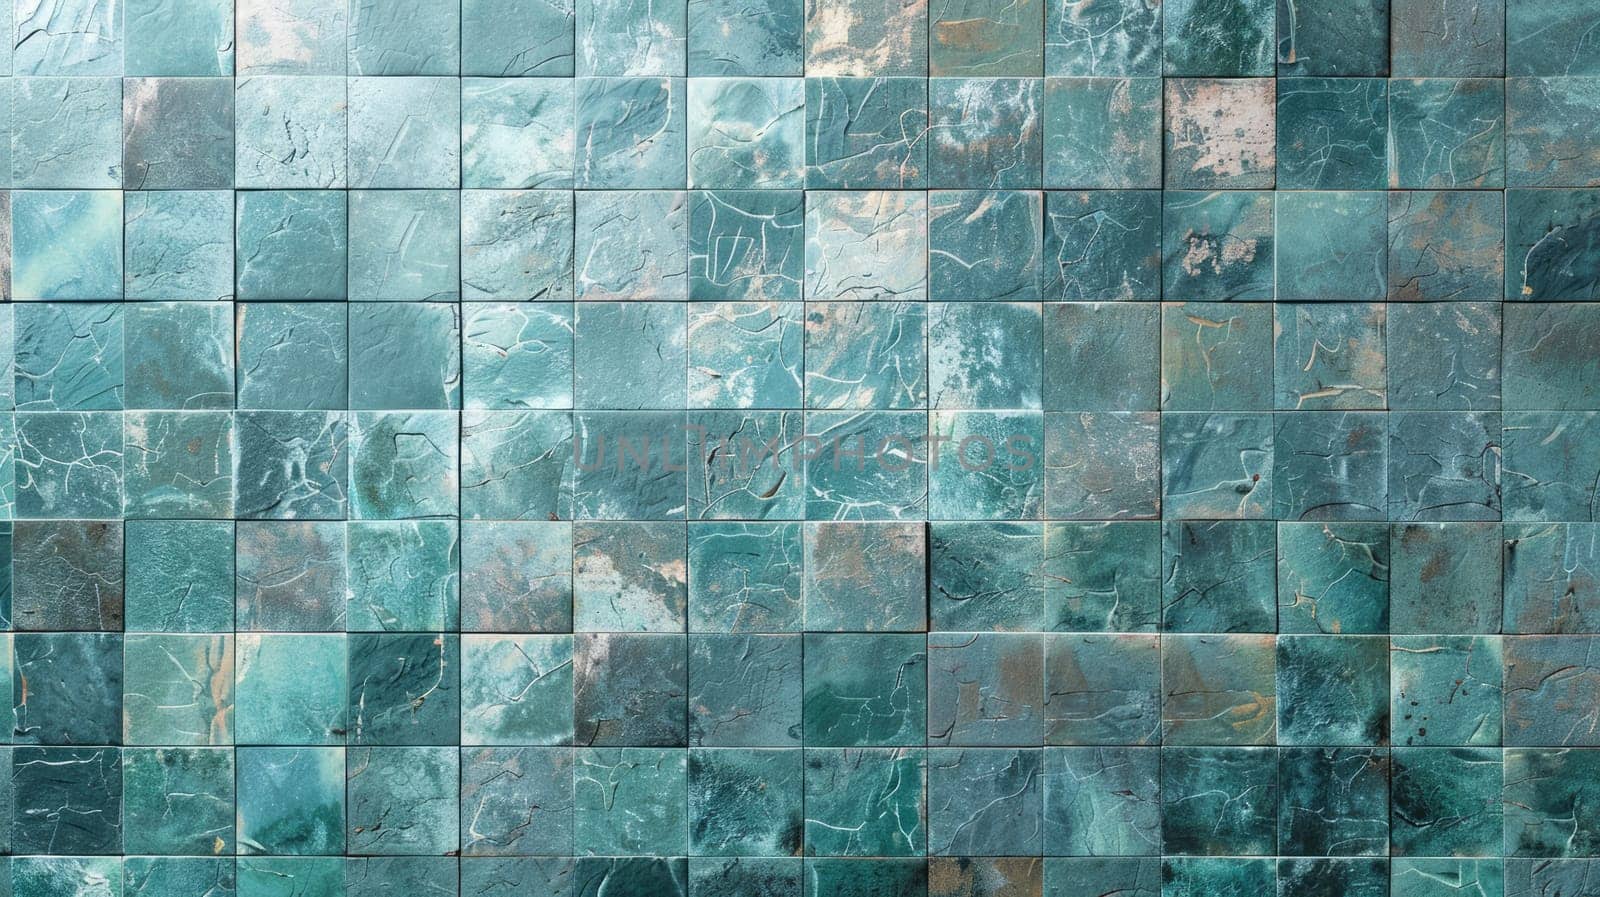 Tiles for facing the pool. Ceramic tiles. Texture for facing walls of the pool by natali_brill